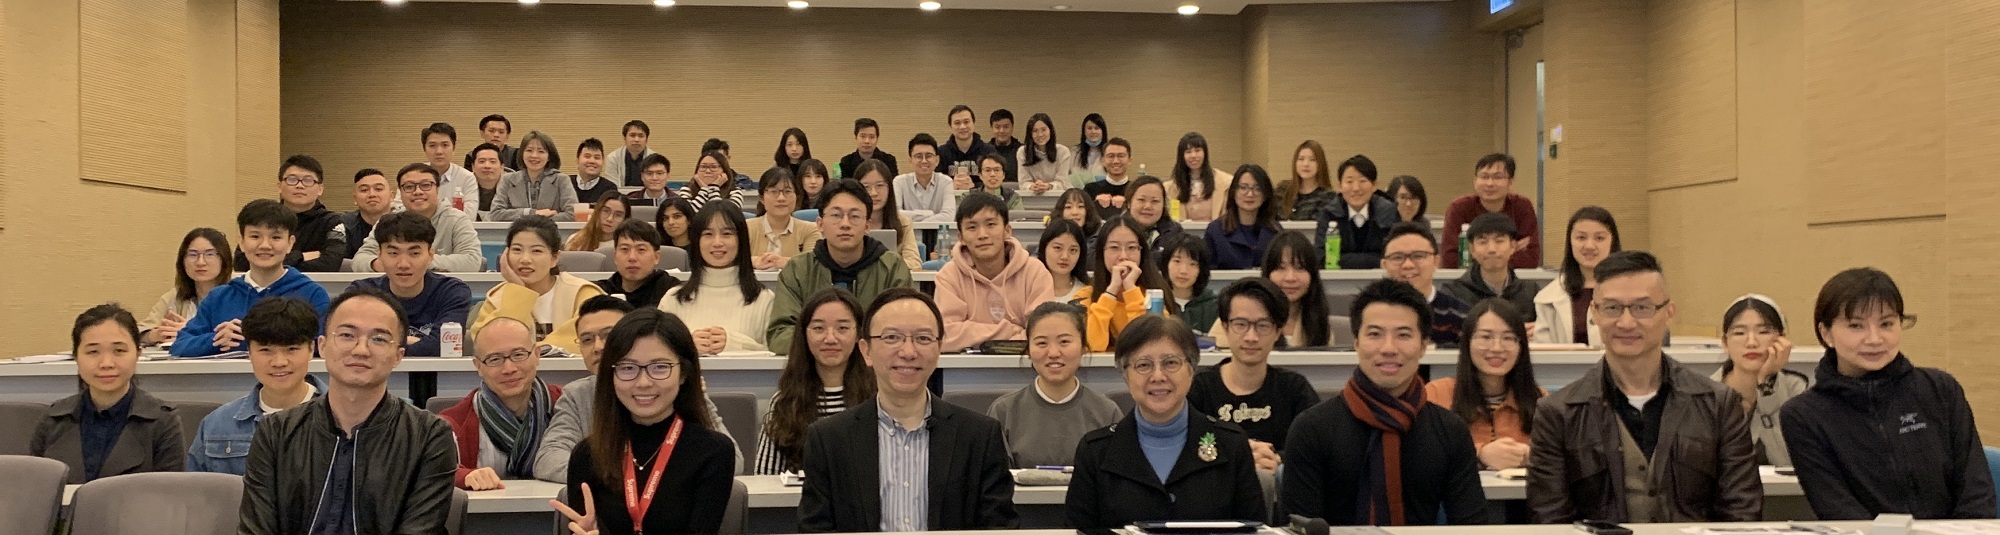 Mr. Victor Lam, Government Chief Information Officer (front row, third left) with Prof. Winnie Tang, Honorary Professor, Department of Computer Science, HKU (front row, fourth left) and other guests and students at guest lecture on "The Concepts and Initiatives of Smart City" at HKU.